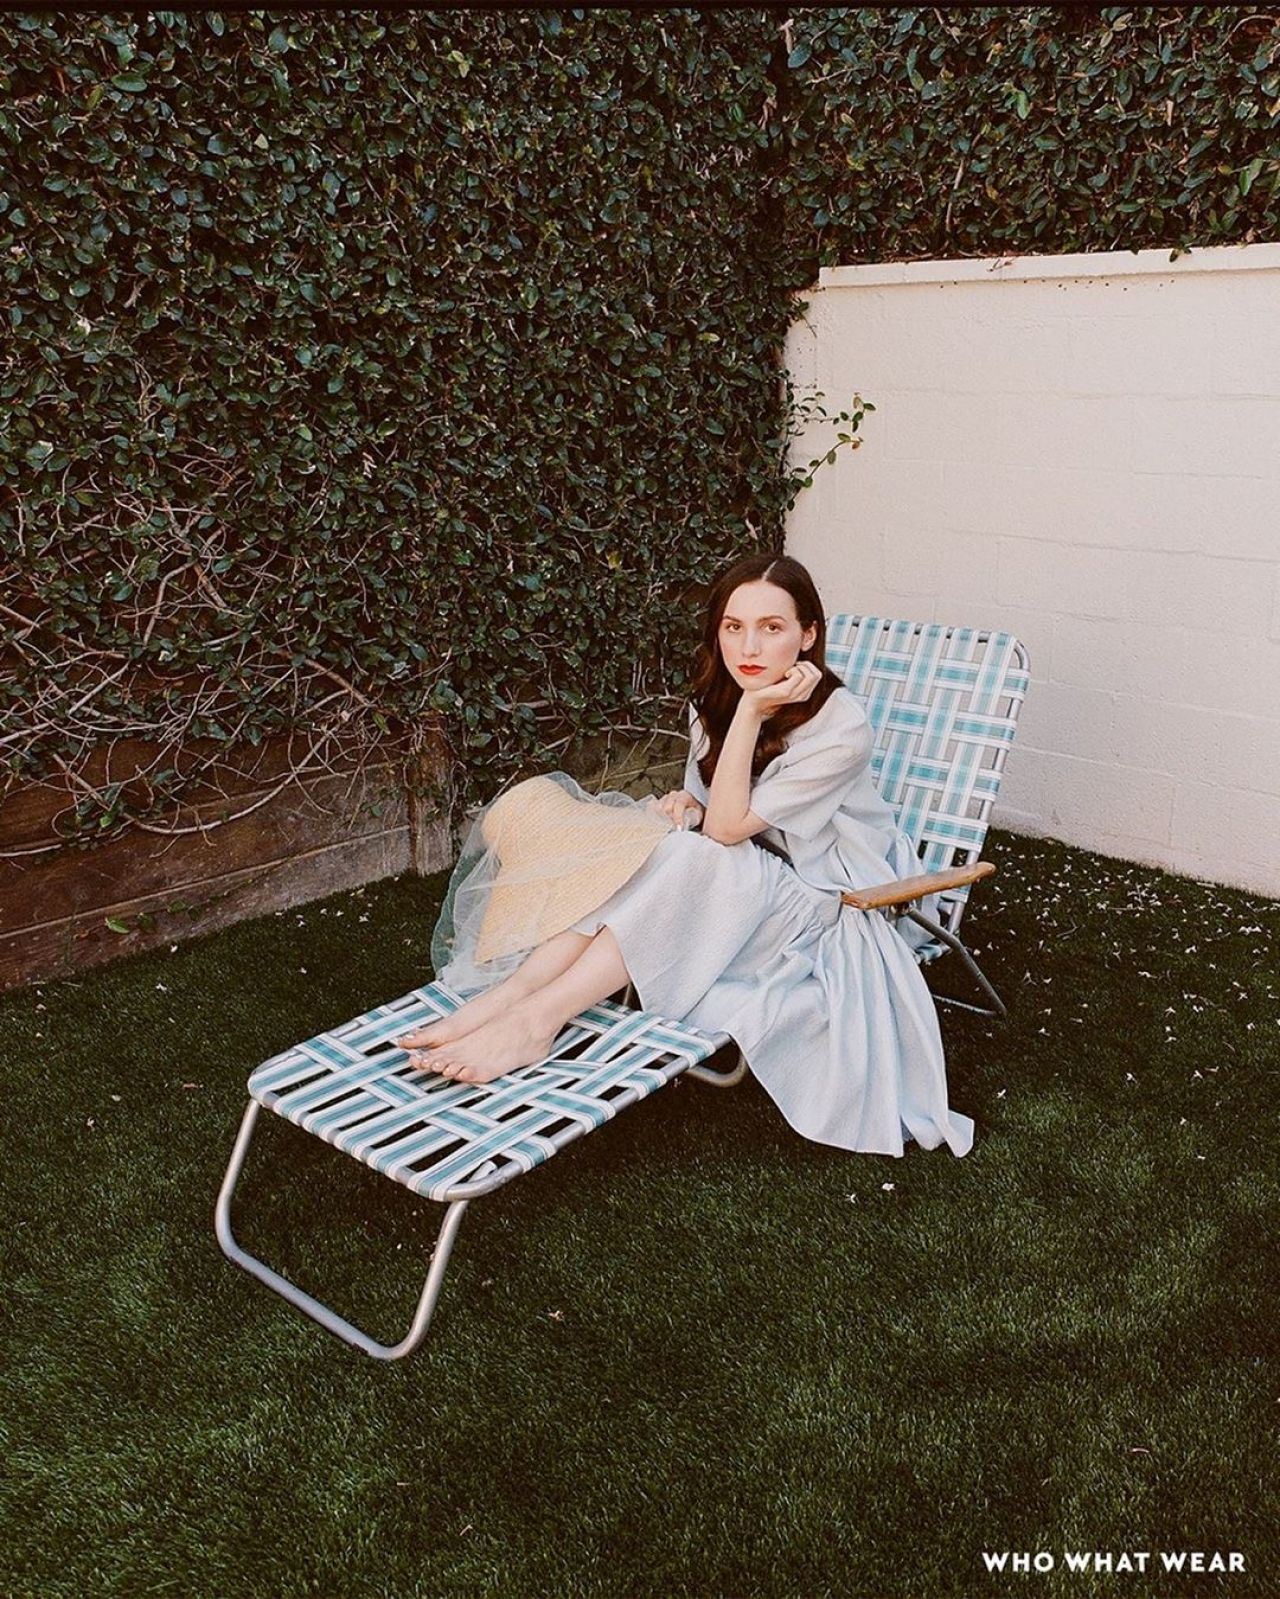 Maude Apatow - Photoshoot for WhoWhatWear May 2020.